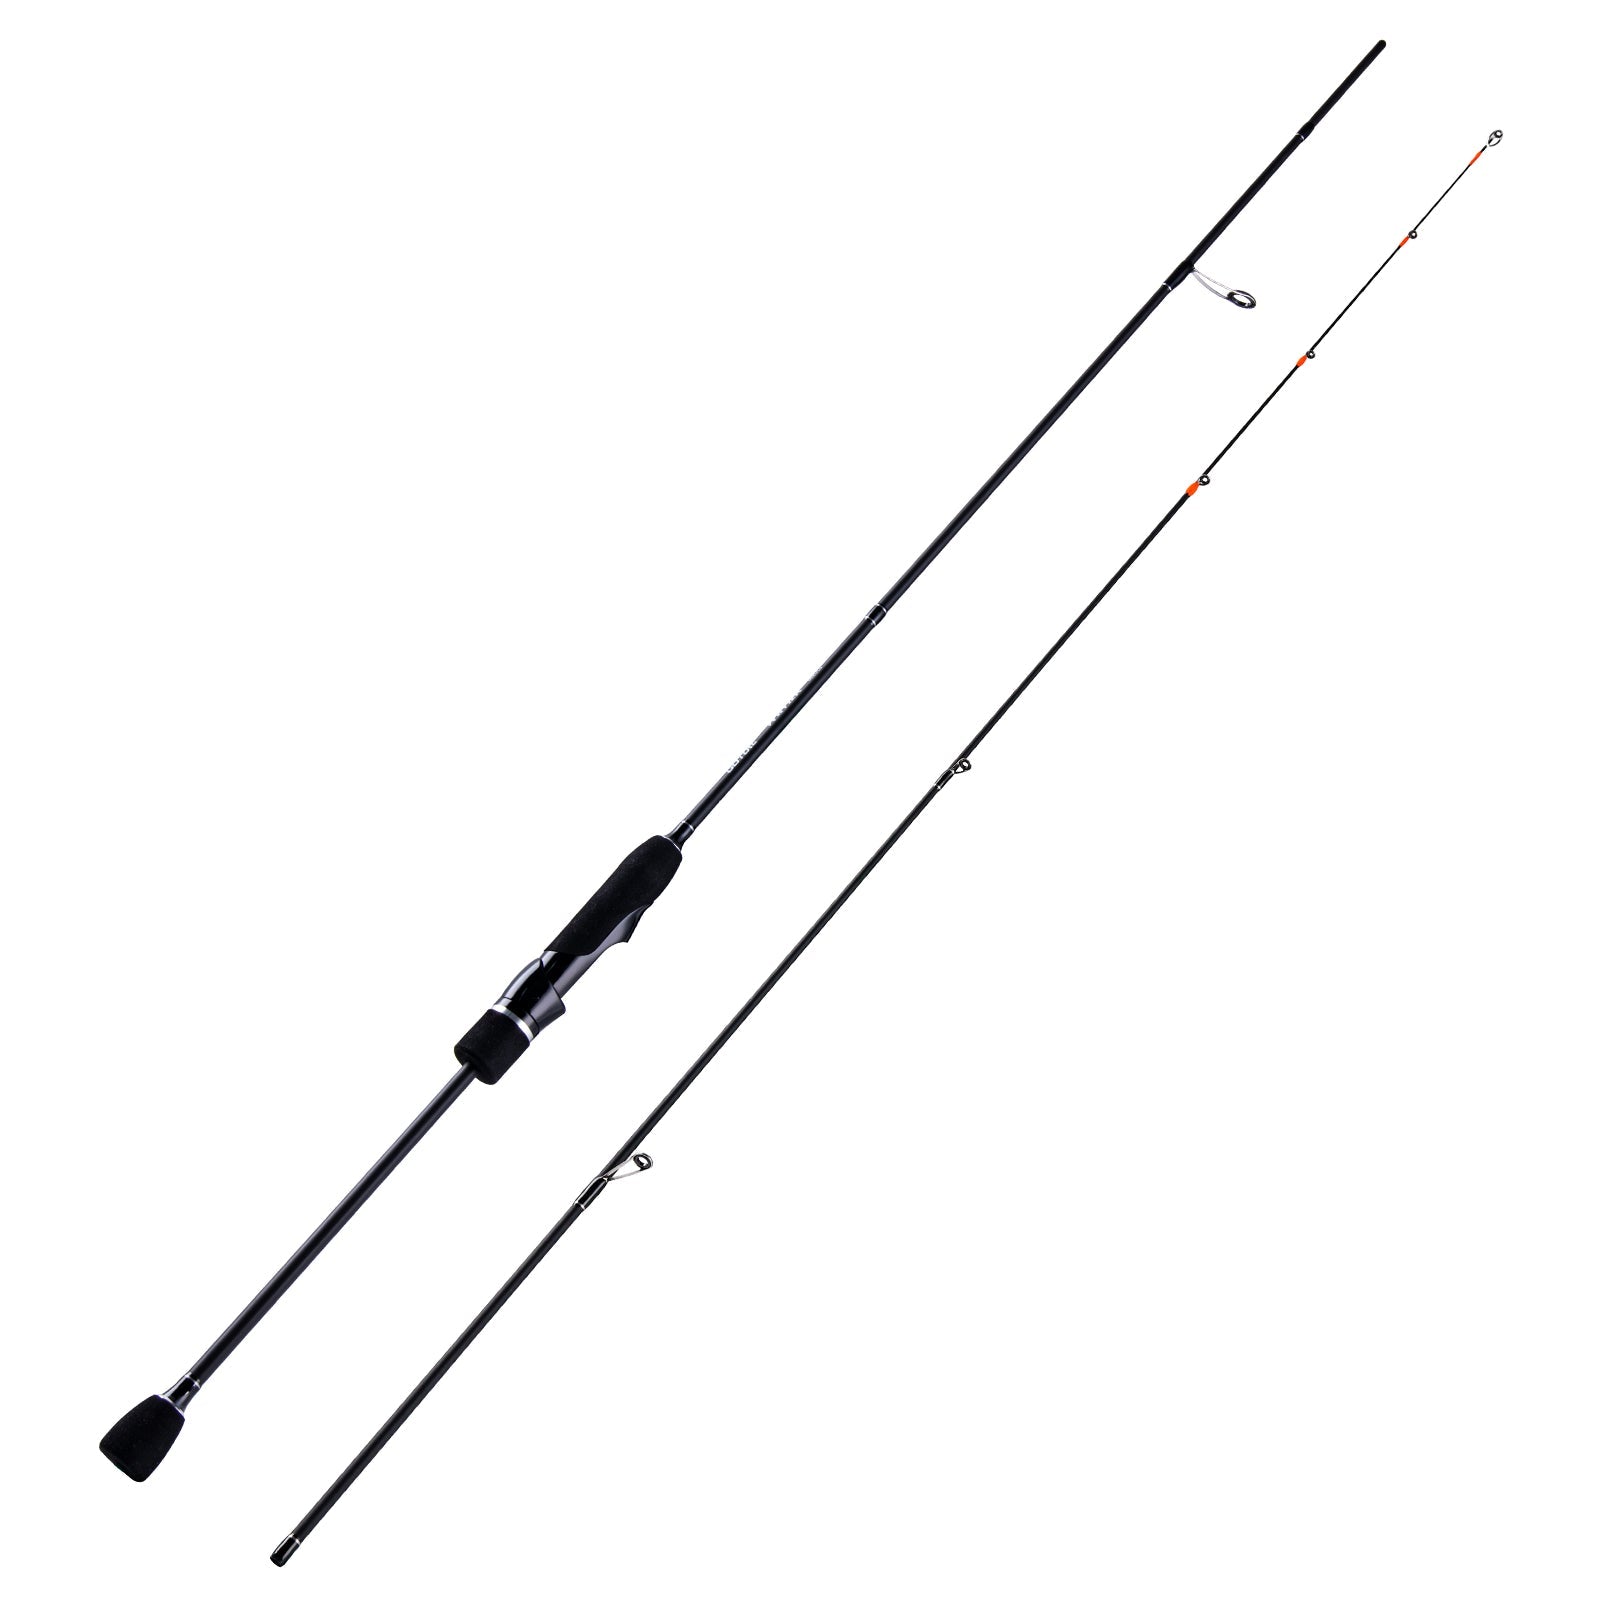 Goture Fly Fishing Rod Set 5/6 7/8 9FT Carbon Fiber Fly Rod with